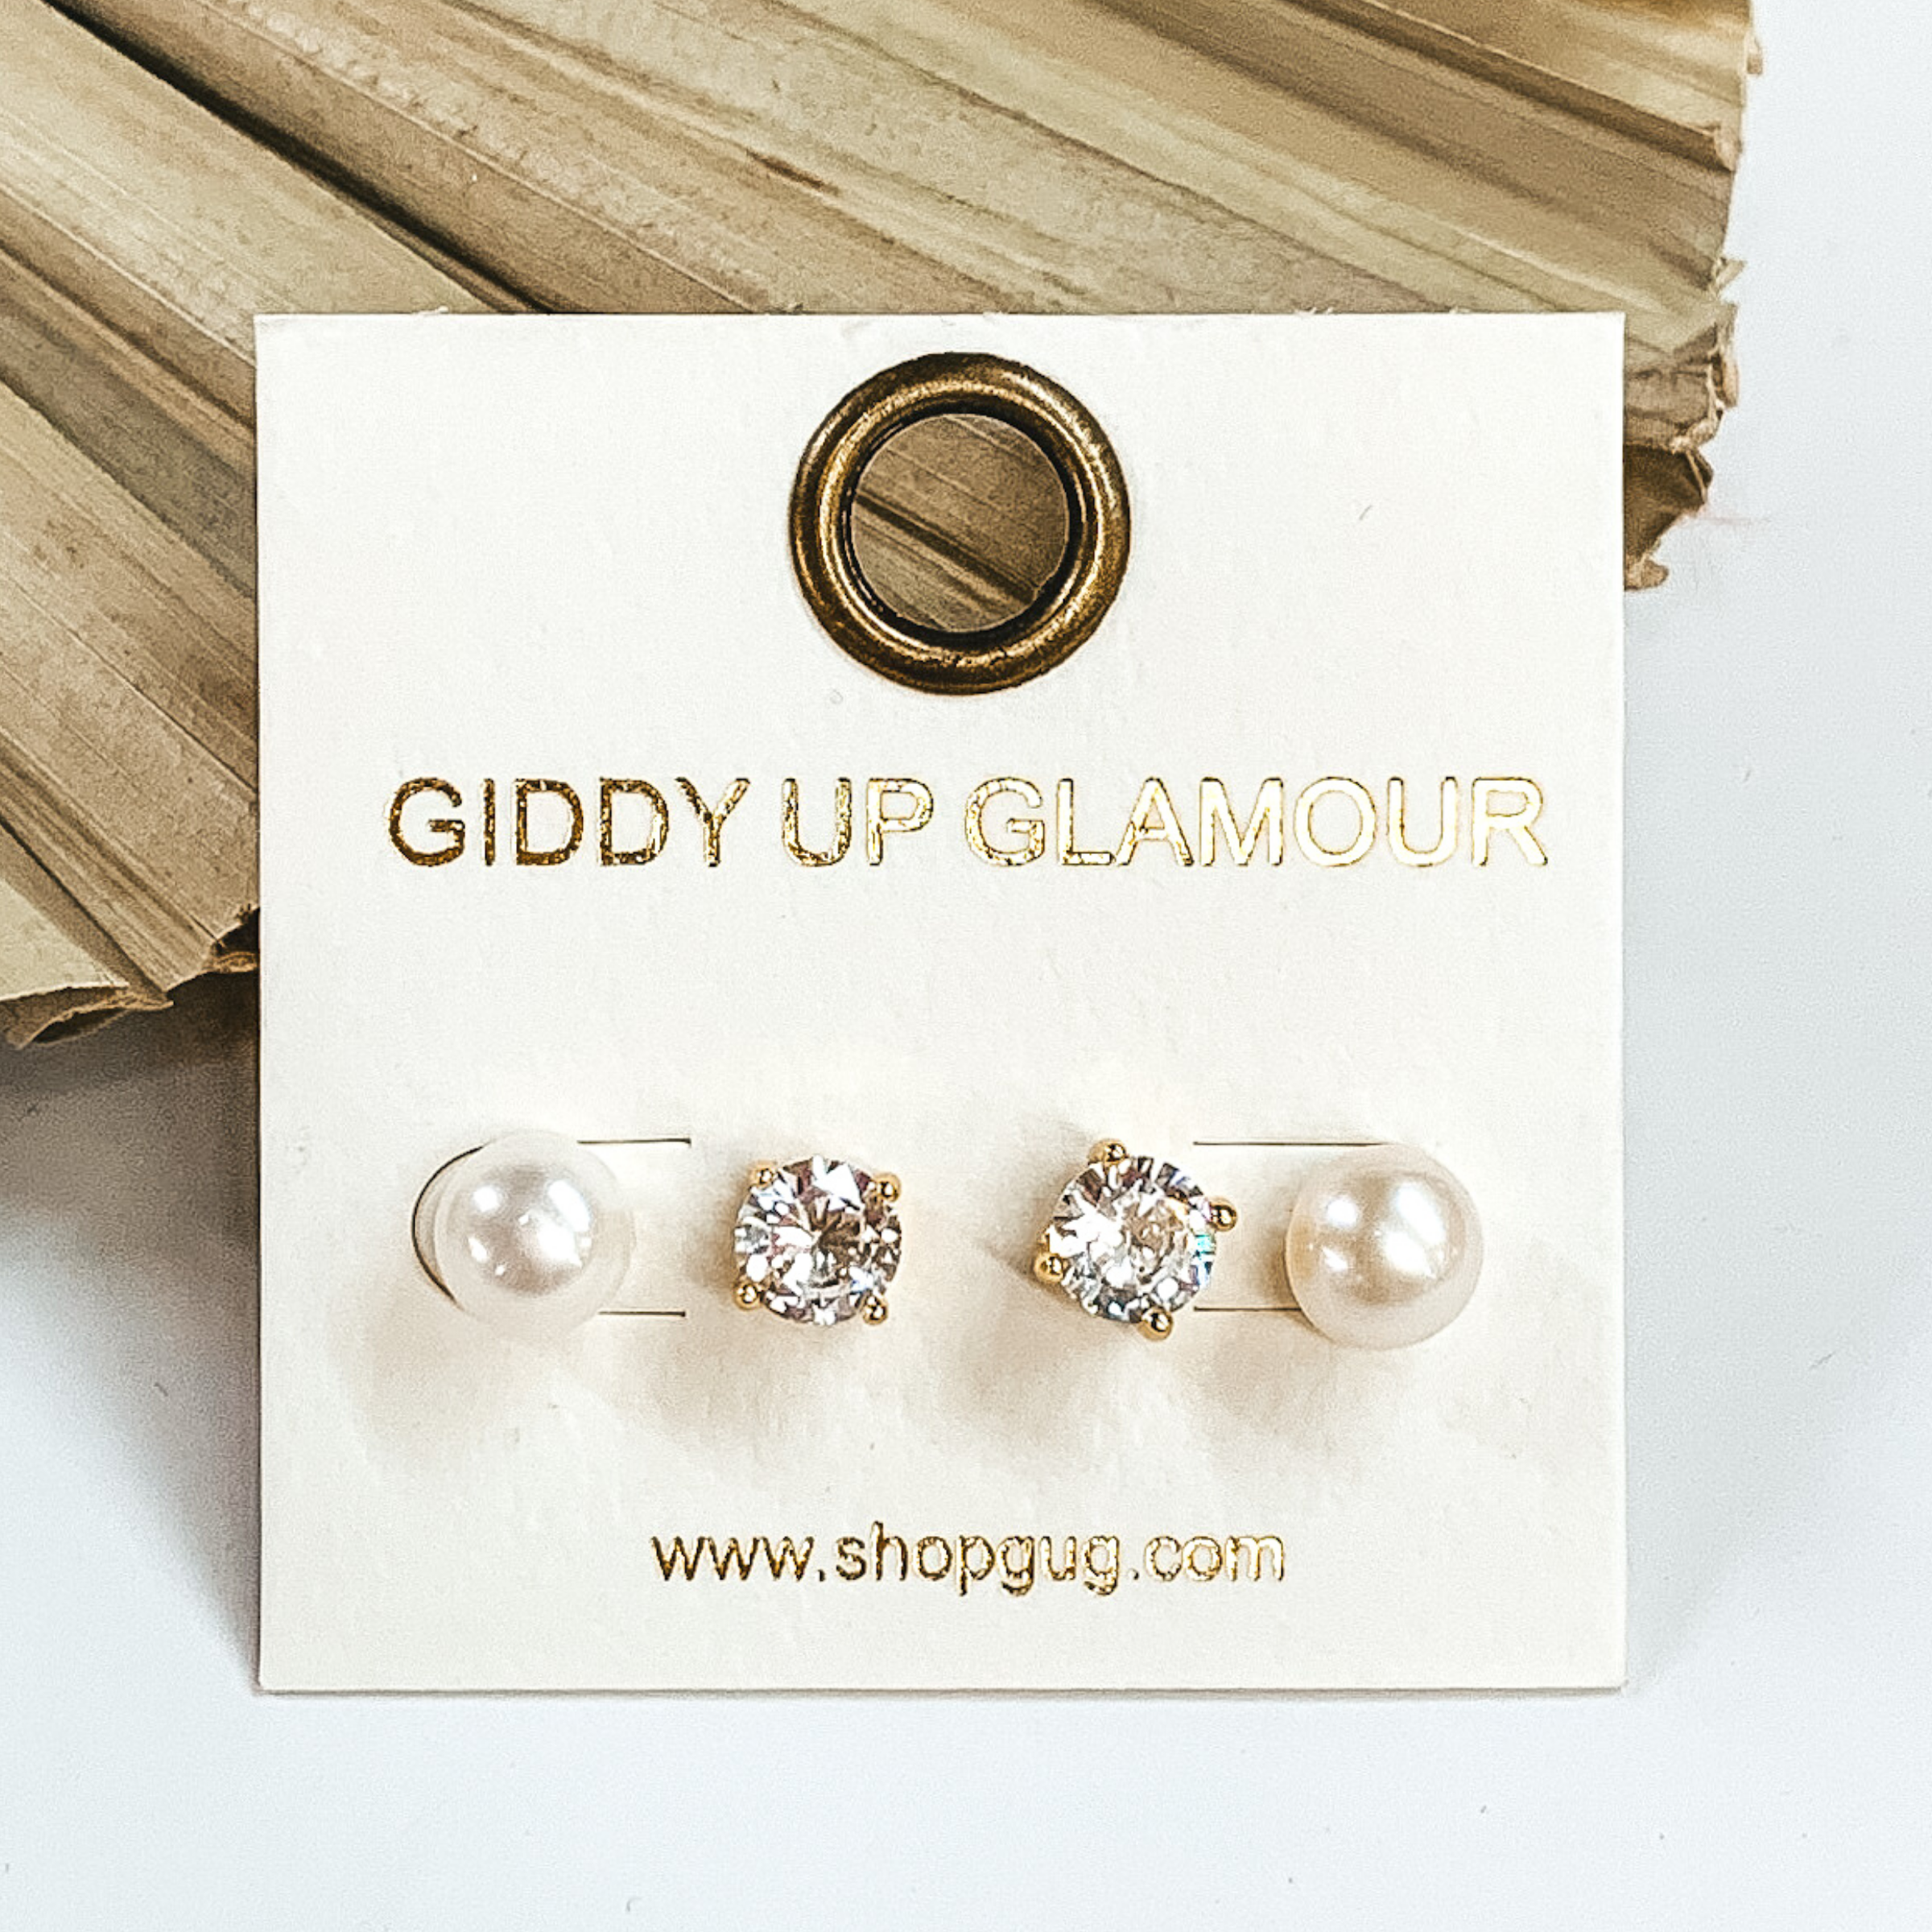 Clear crystal studs and white pearl studs. These earrings are pictured laying on a green palm leaf on a white background.